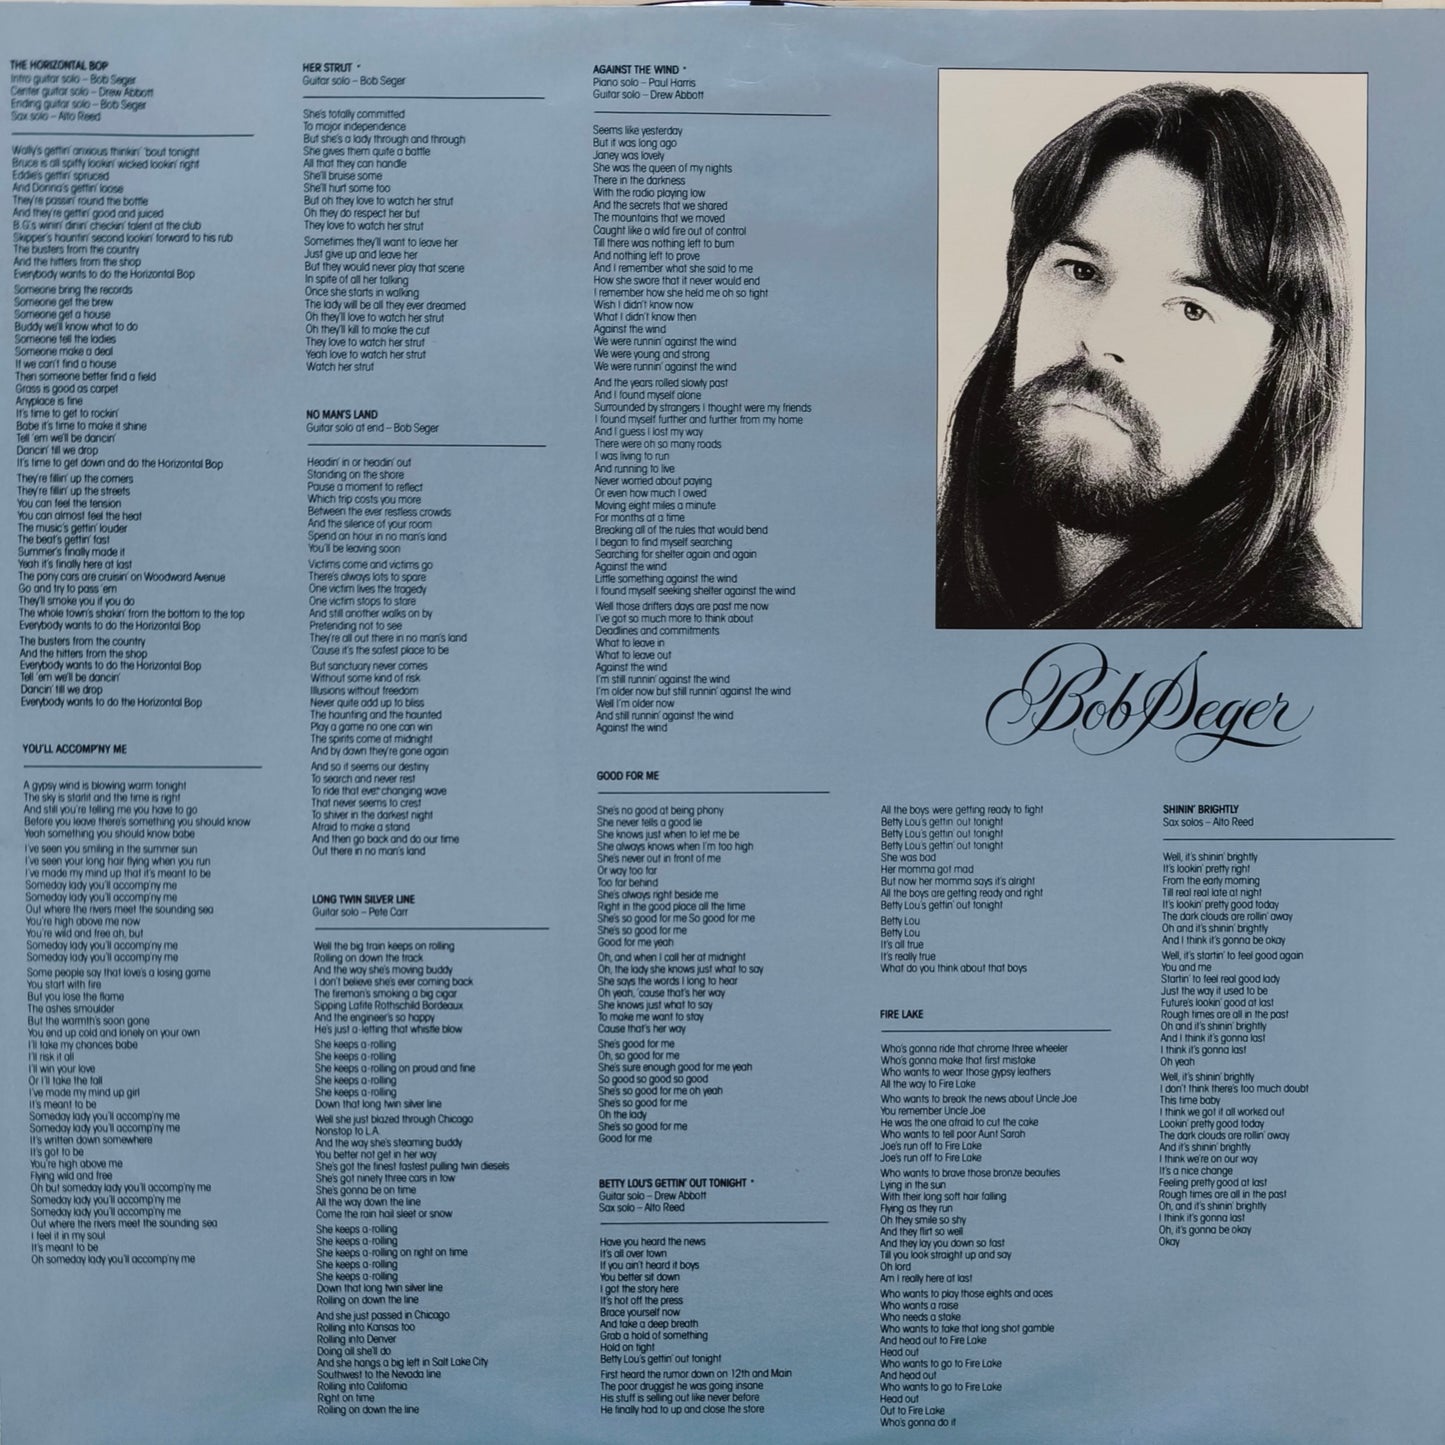 BOB SEGER AND THE SILVER BULLET BAND - Against The Wind